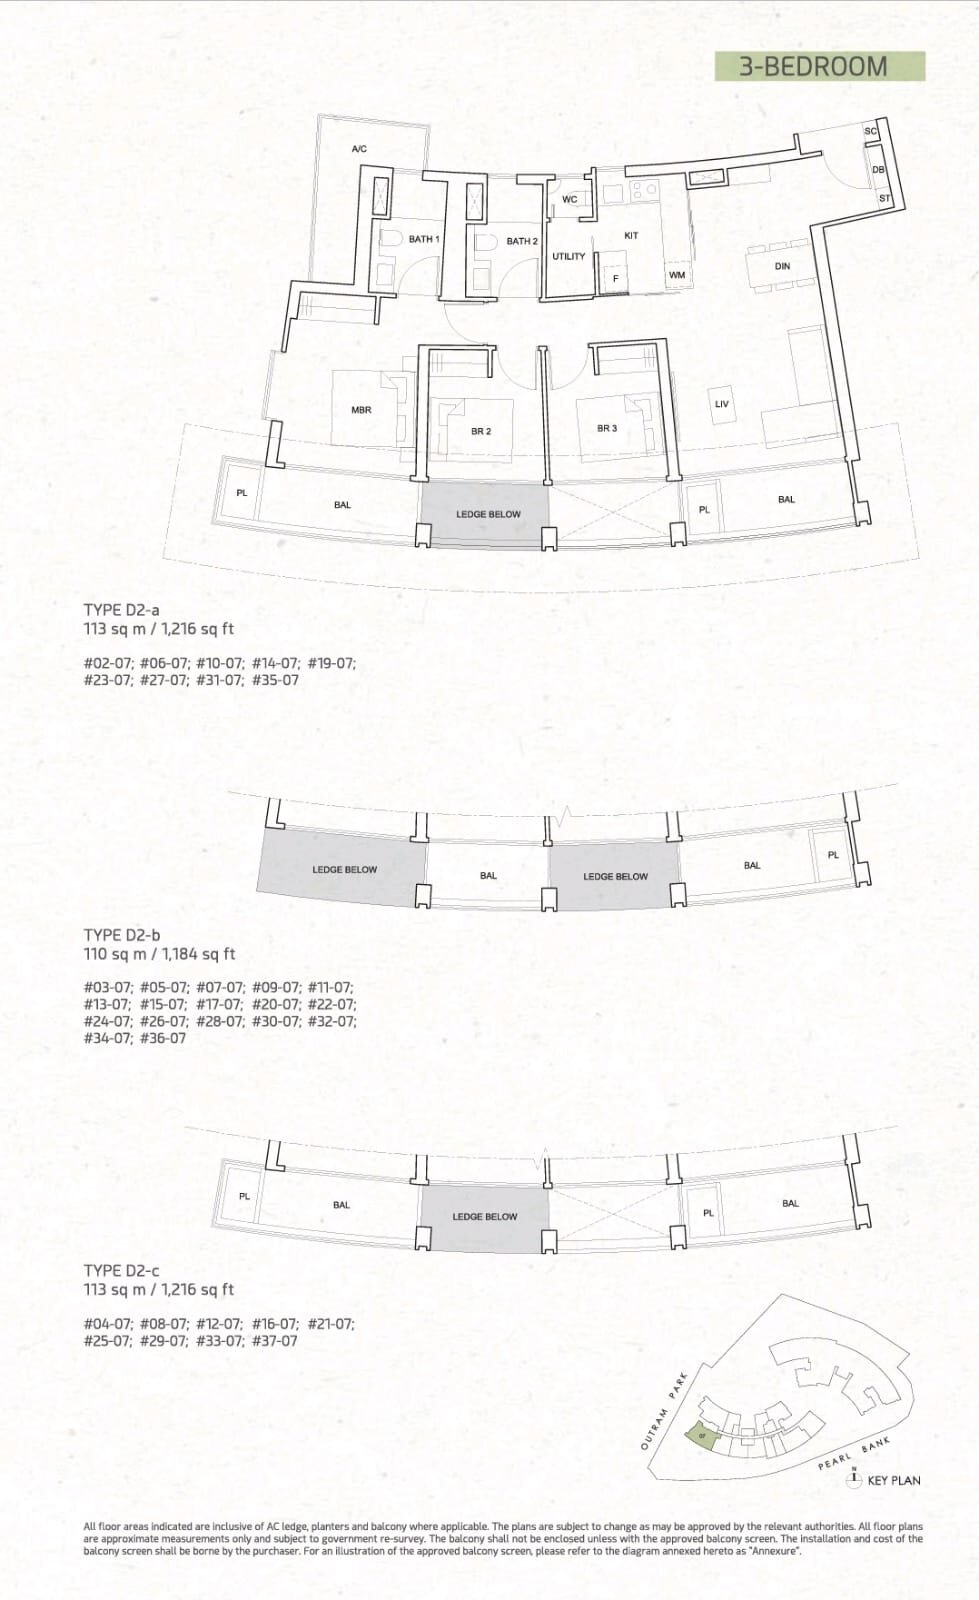 OPB Floor plan 3B D2-a, b and c